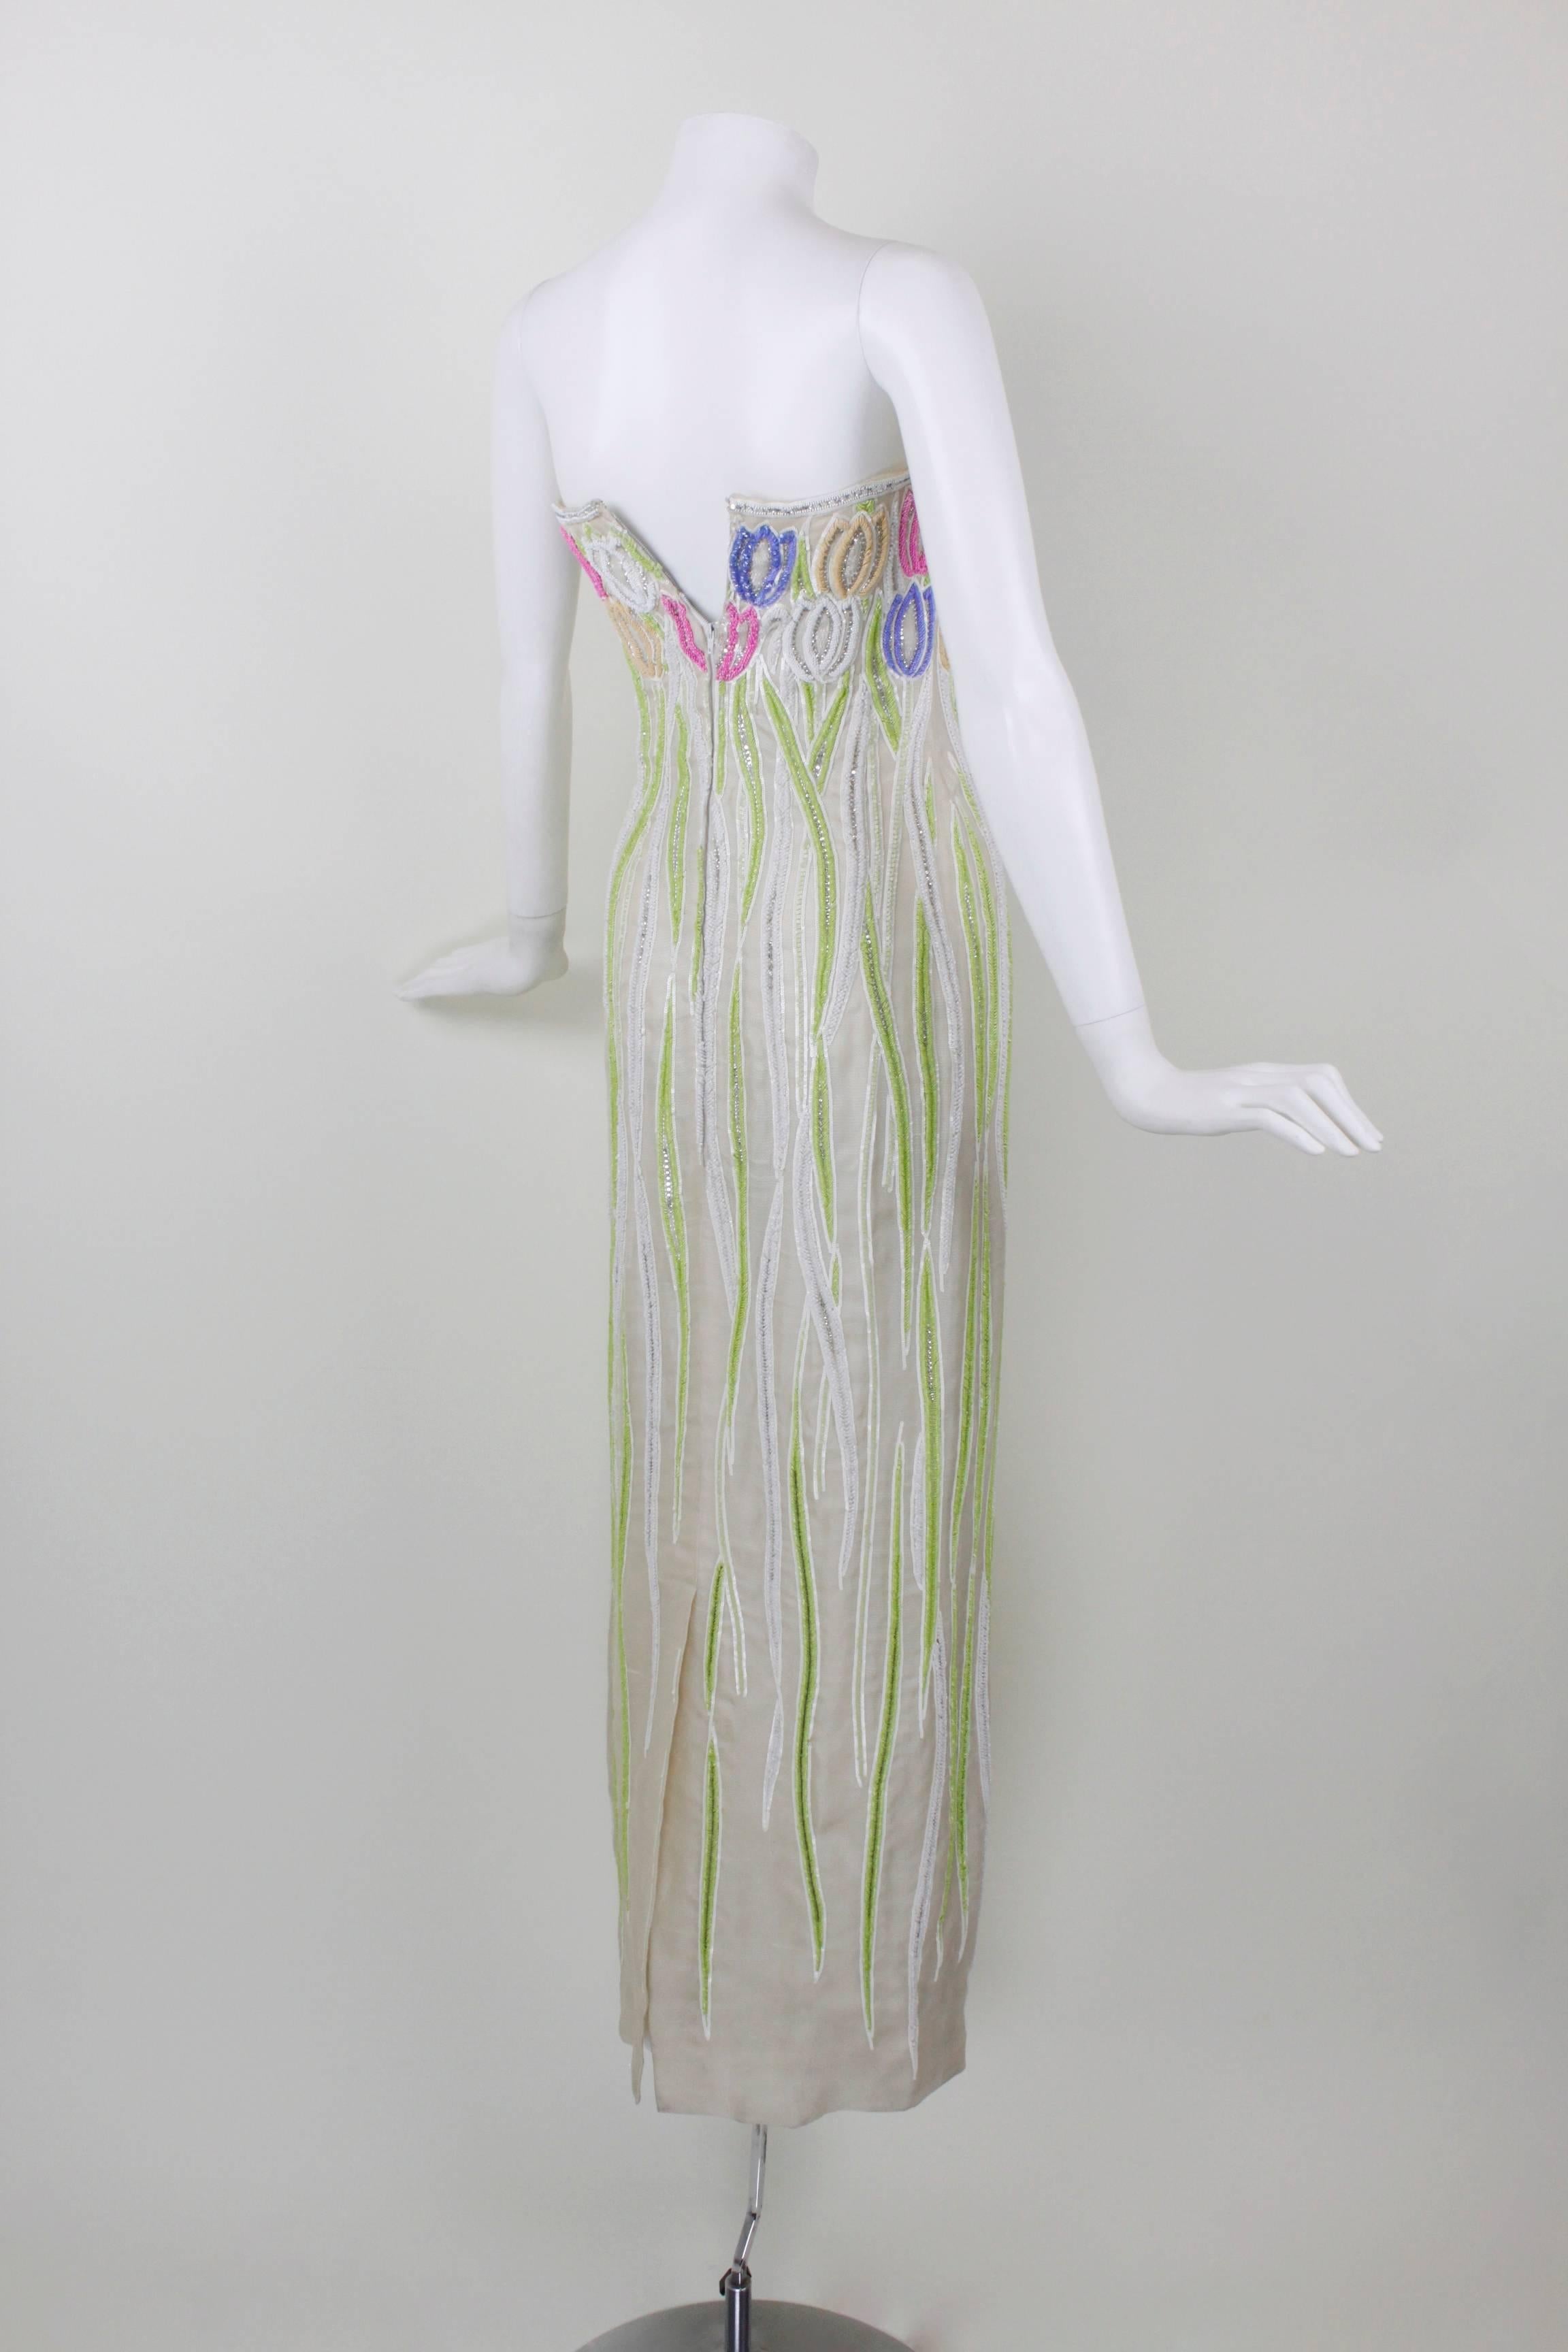 1970s Dior Haute Couture Strapless Beaded & Lesage Embroidery Evening Gown In Excellent Condition For Sale In Los Angeles, CA